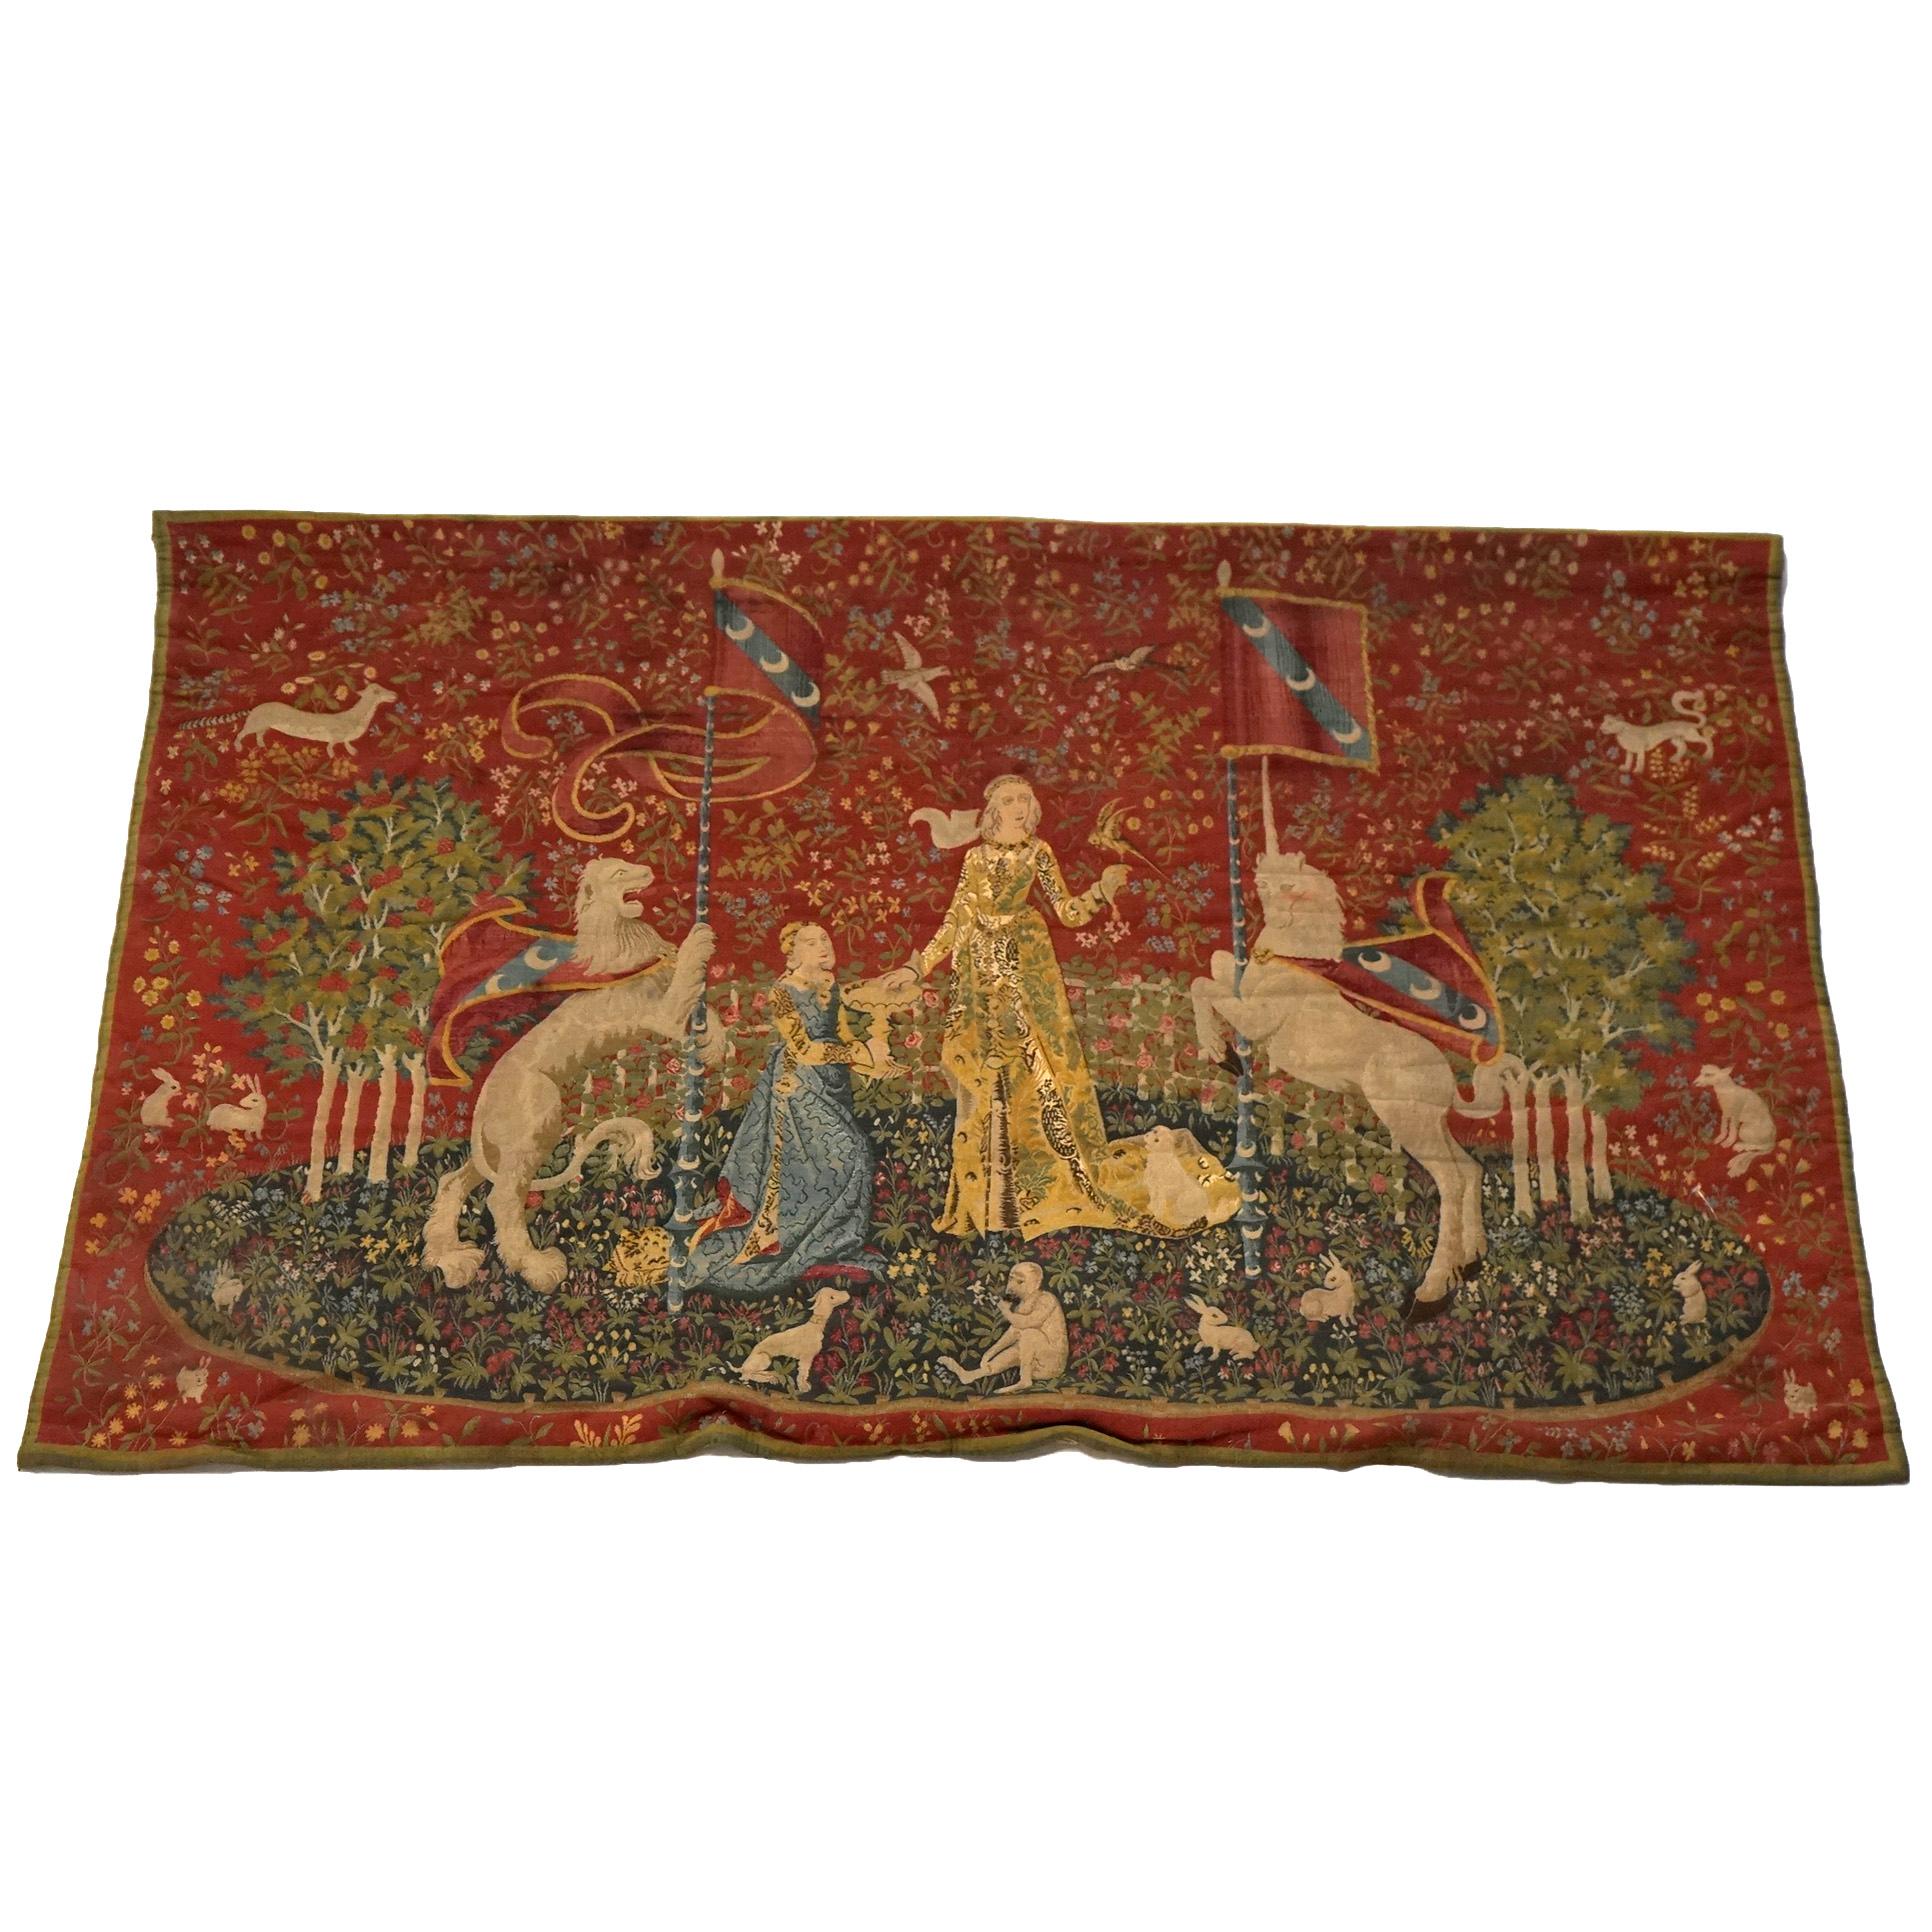 An antique Continental wall tapestry offers The Lady and The Unicorn, Sense of Sight design, 19th century.

Measures- 46.25''H x 67.5''W x .5''D

Historical Note:
The Lady and the Unicorn (French: La Dame à la licorne) is the modern title given